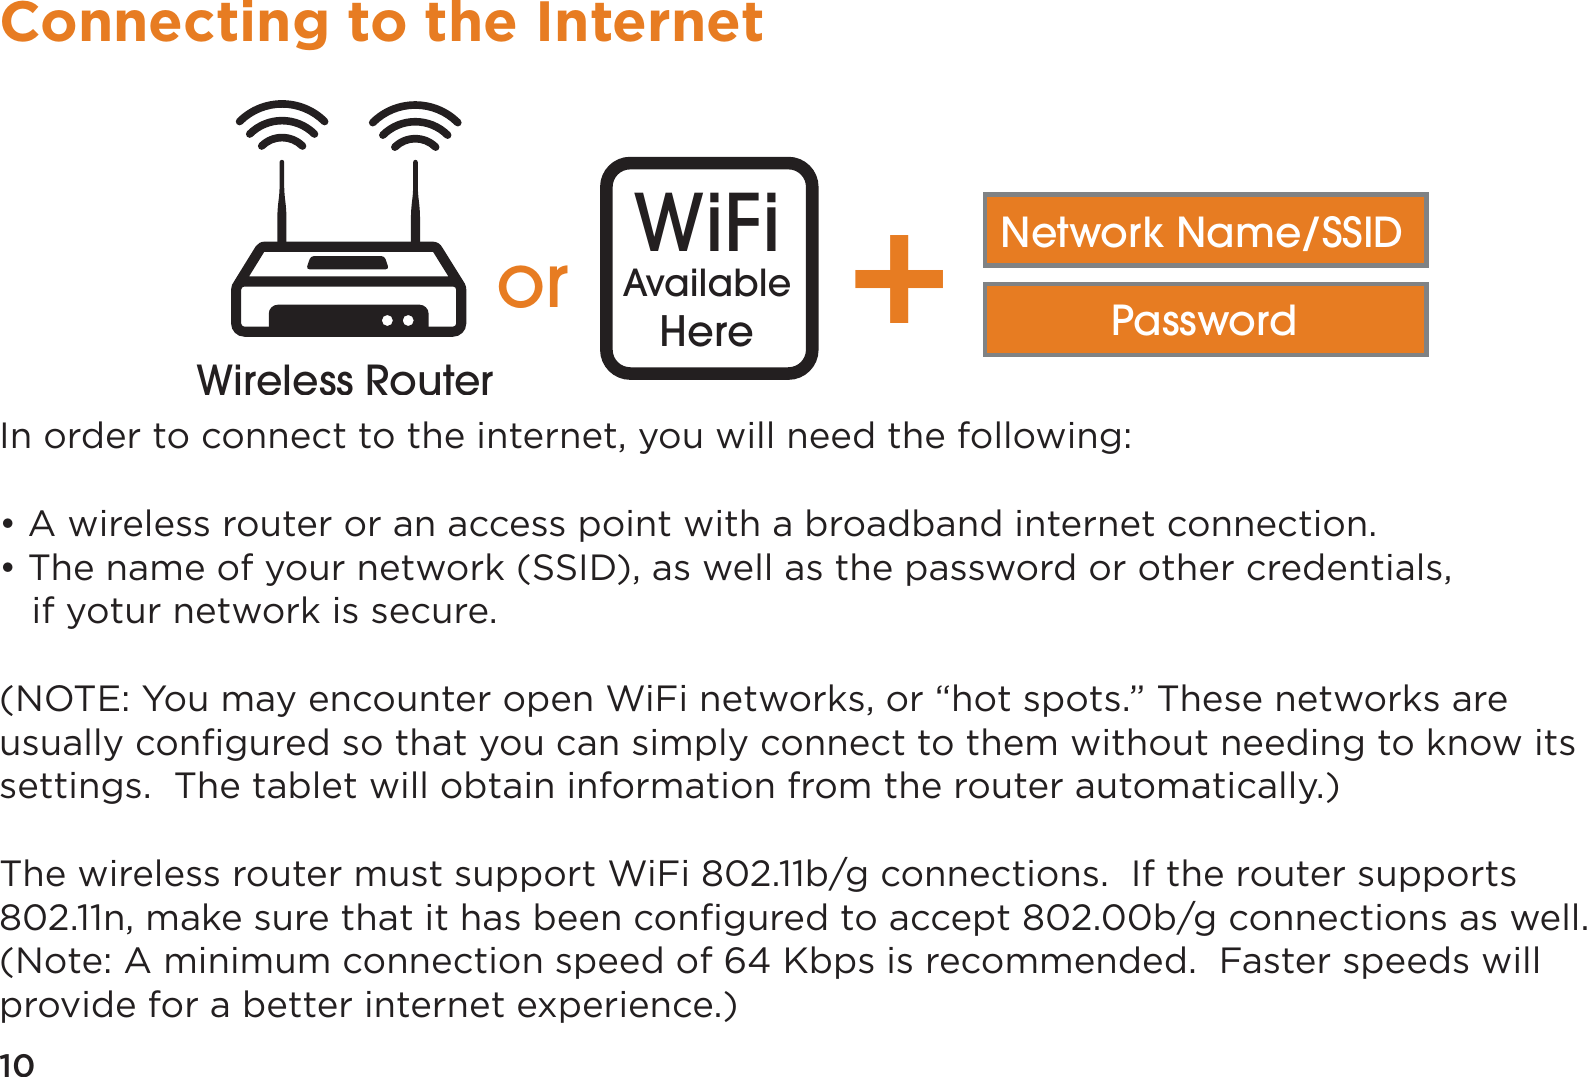 10Connecting to the InternetIn order to connect to the internet, you will need the following:• A wireless router or an access point with a broadband internet connection.• The name of your network (SSID), as well as the password or other credentials,   if yotur network is secure.(NOTE: You may encounter open WiFi networks, or “hot spots.” These networks are usually conﬁgured so that you can simply connect to them without needing to know its settings.  The tablet will obtain information from the router automatically.)The wireless router must support WiFi 802.11b/g connections.  If the router supports 802.11n, make sure that it has been conﬁgured to accept 802.00b/g connections as well. (Note: A minimum connection speed of 64 Kbps is recommended.  Faster speeds will provide for a better internet experience.)or WiFiAvailableHere +Network Name/SSIDPasswordWireless Router